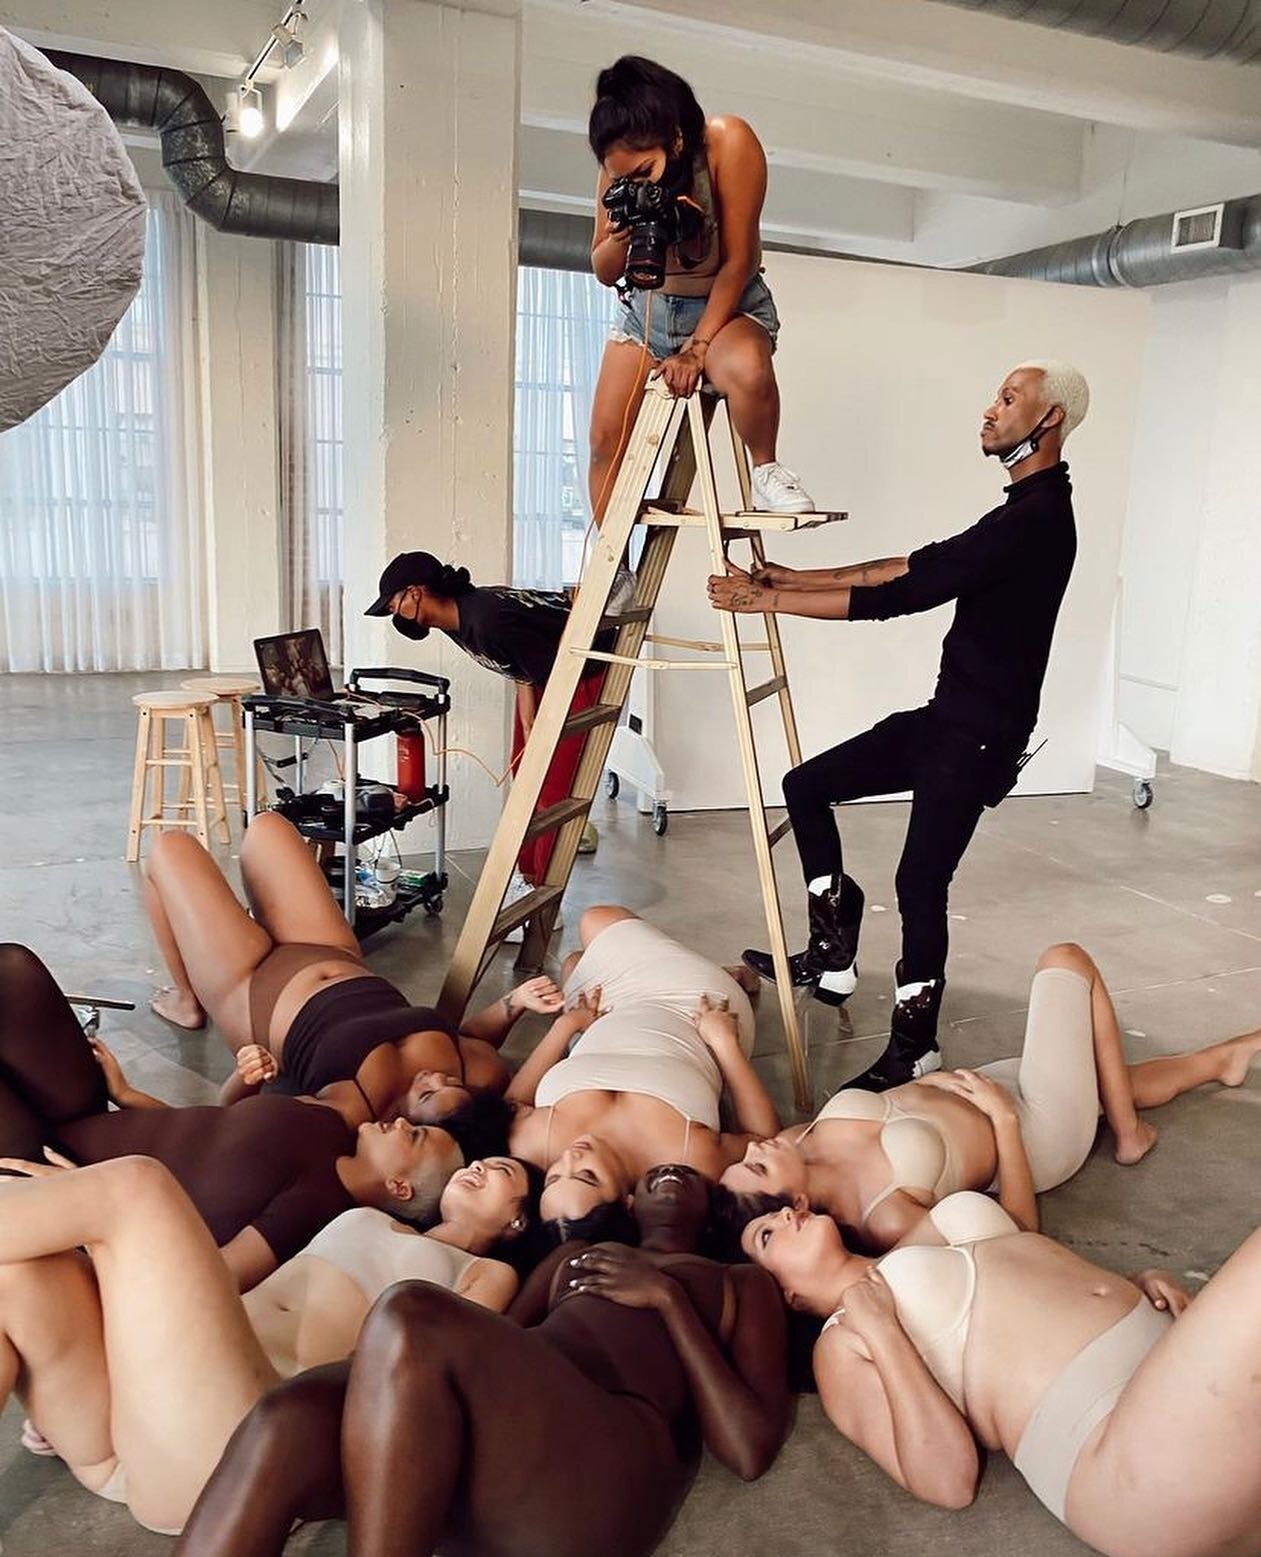 Behind the scenes on a very beautiful Photoshoot celebrating the beauty in a diverse community of women 🤎

For questions and info contact us directly or find us on peerspace! 

INFO@IVYSTUDIOSLA.COM 
.
.
.
.